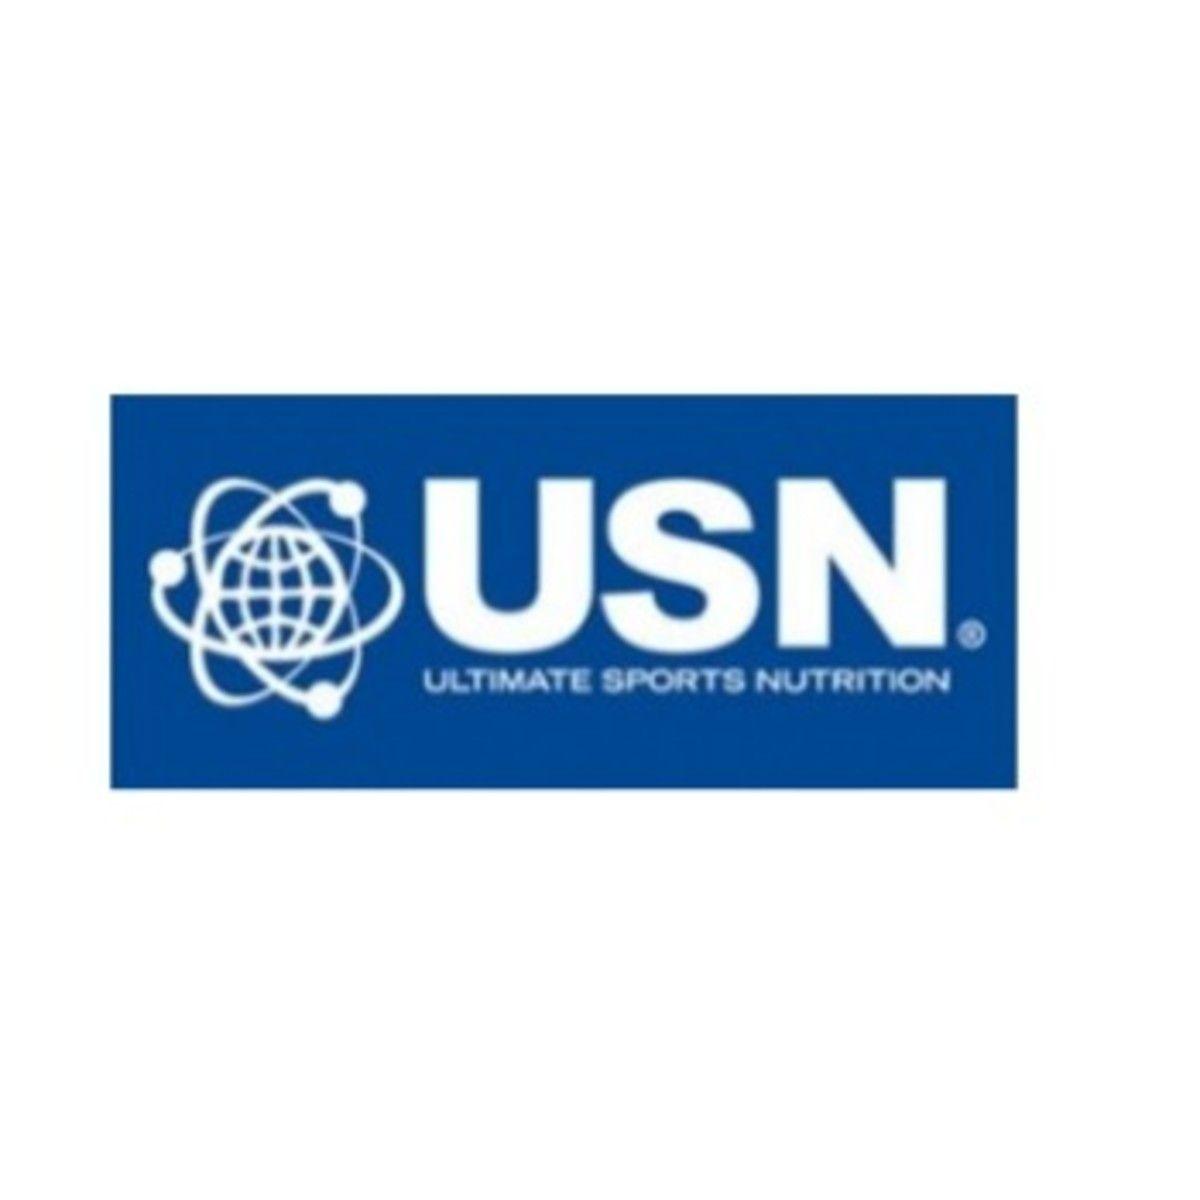 USN Logo - USN launches lean muscle builder protein shake